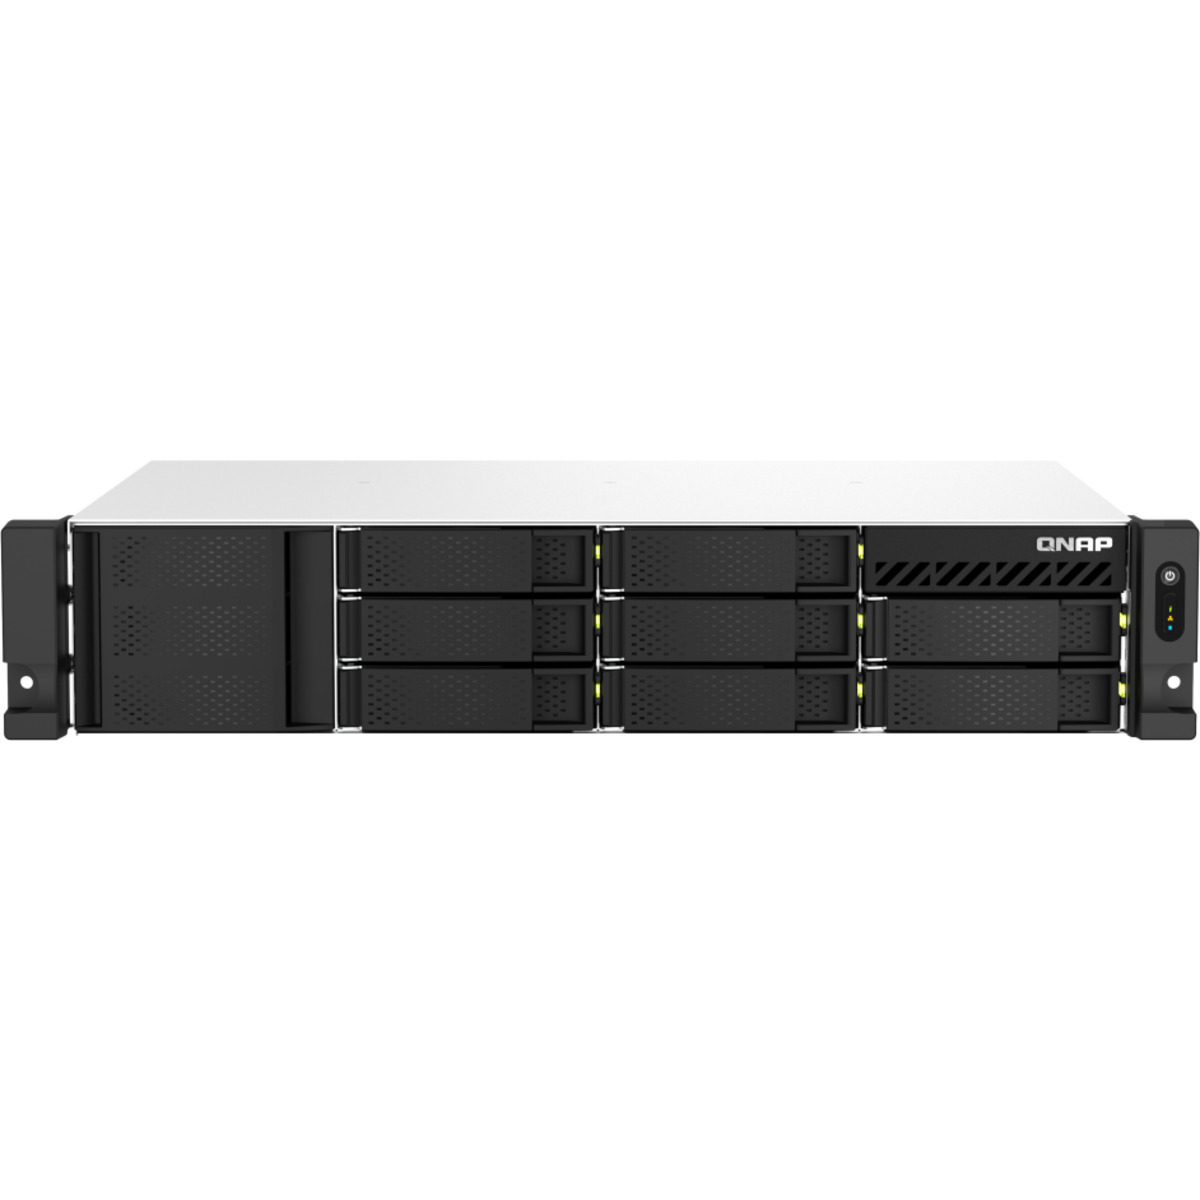 buy $4349 QNAP TS-873AeU-RP 48tb RackMount NAS - Network Attached Storage Device 8x6000gb Seagate IronWolf Pro ST6000NT001 3.5 7200rpm SATA 6Gb/s HDD NAS Class Drives Installed - Burn-In Tested - FREE RAM UPGRADE - nas headquarters buy network attached storage server device das new raid-5 free shipping simply usa TS-873AeU-RP